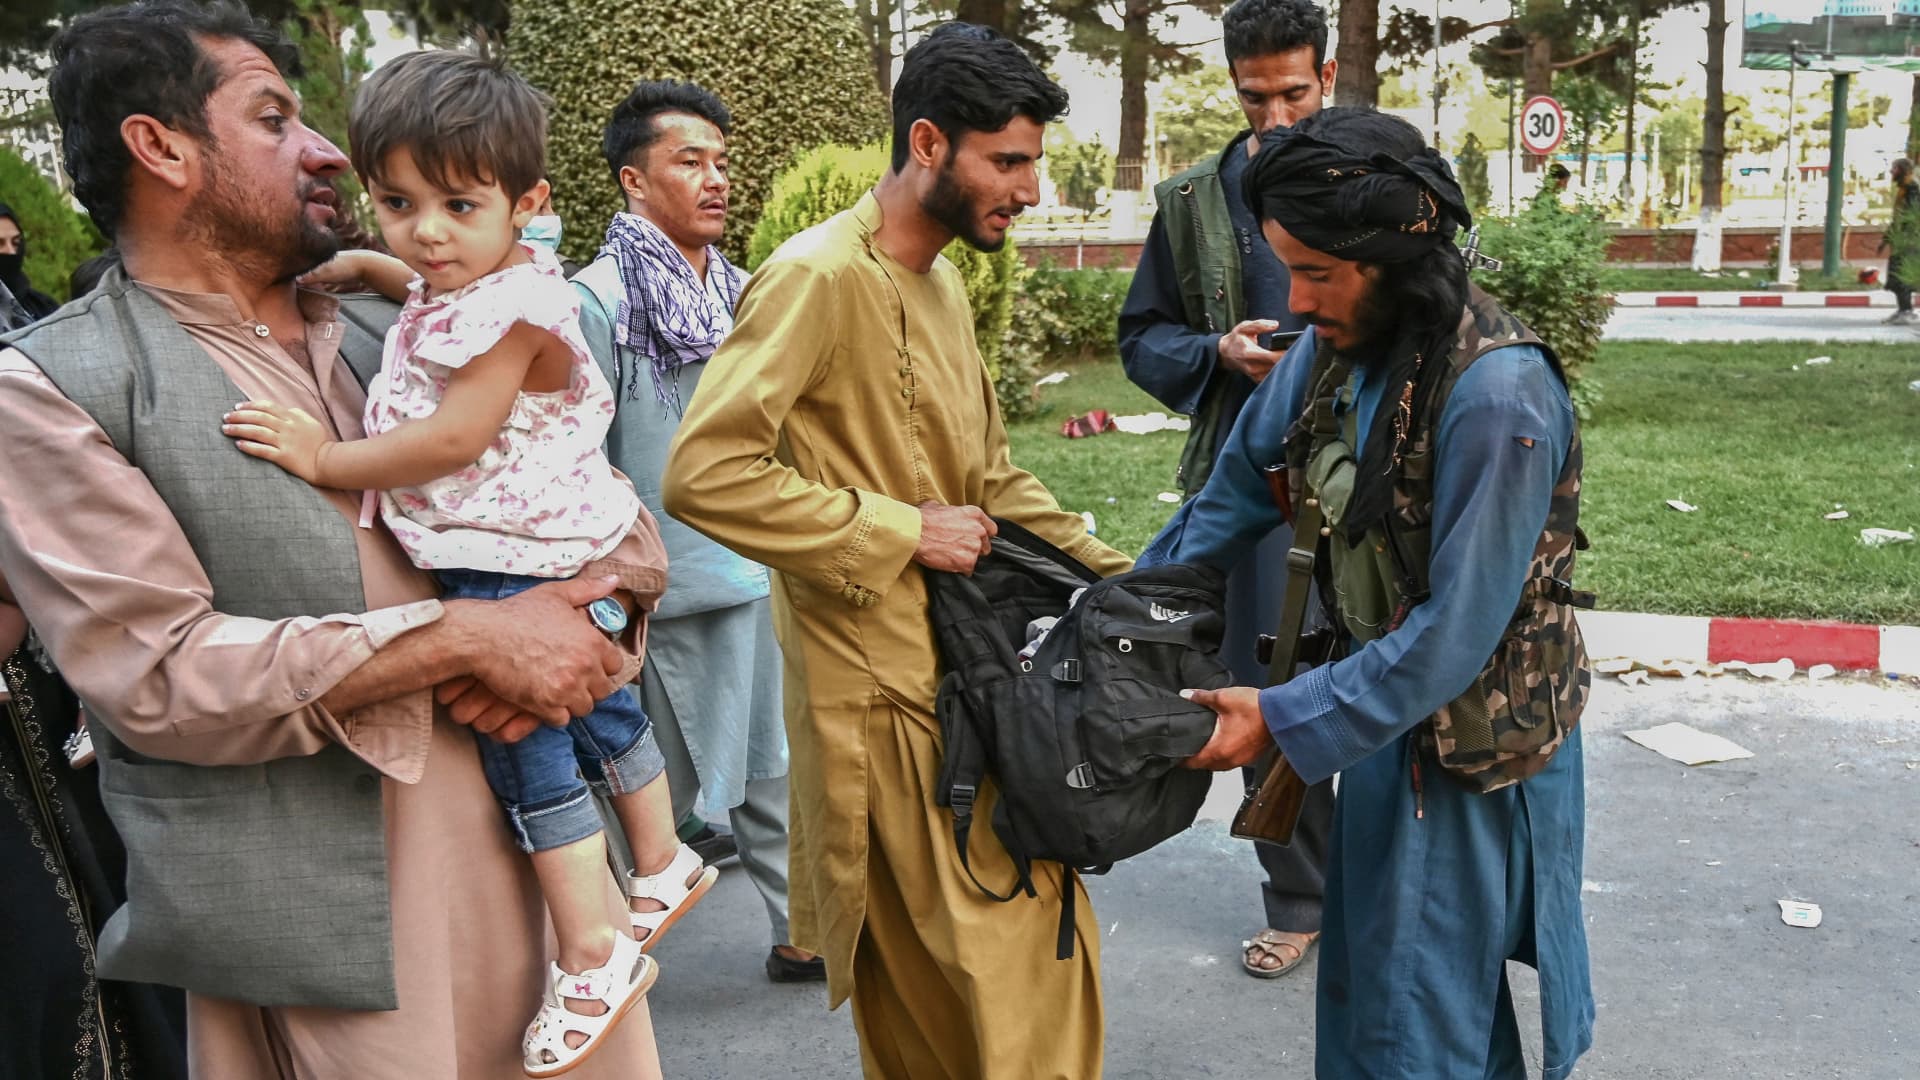 A Taliban fighter (R) searches the bags of people coming out of the Kabul airport in Kabul on August 16, 2021, after a stunningly swift end to Afghanistan's 20-year war, as thousands of people mobbed the city's airport trying to flee the group's feared hardline brand of Islamist rule.